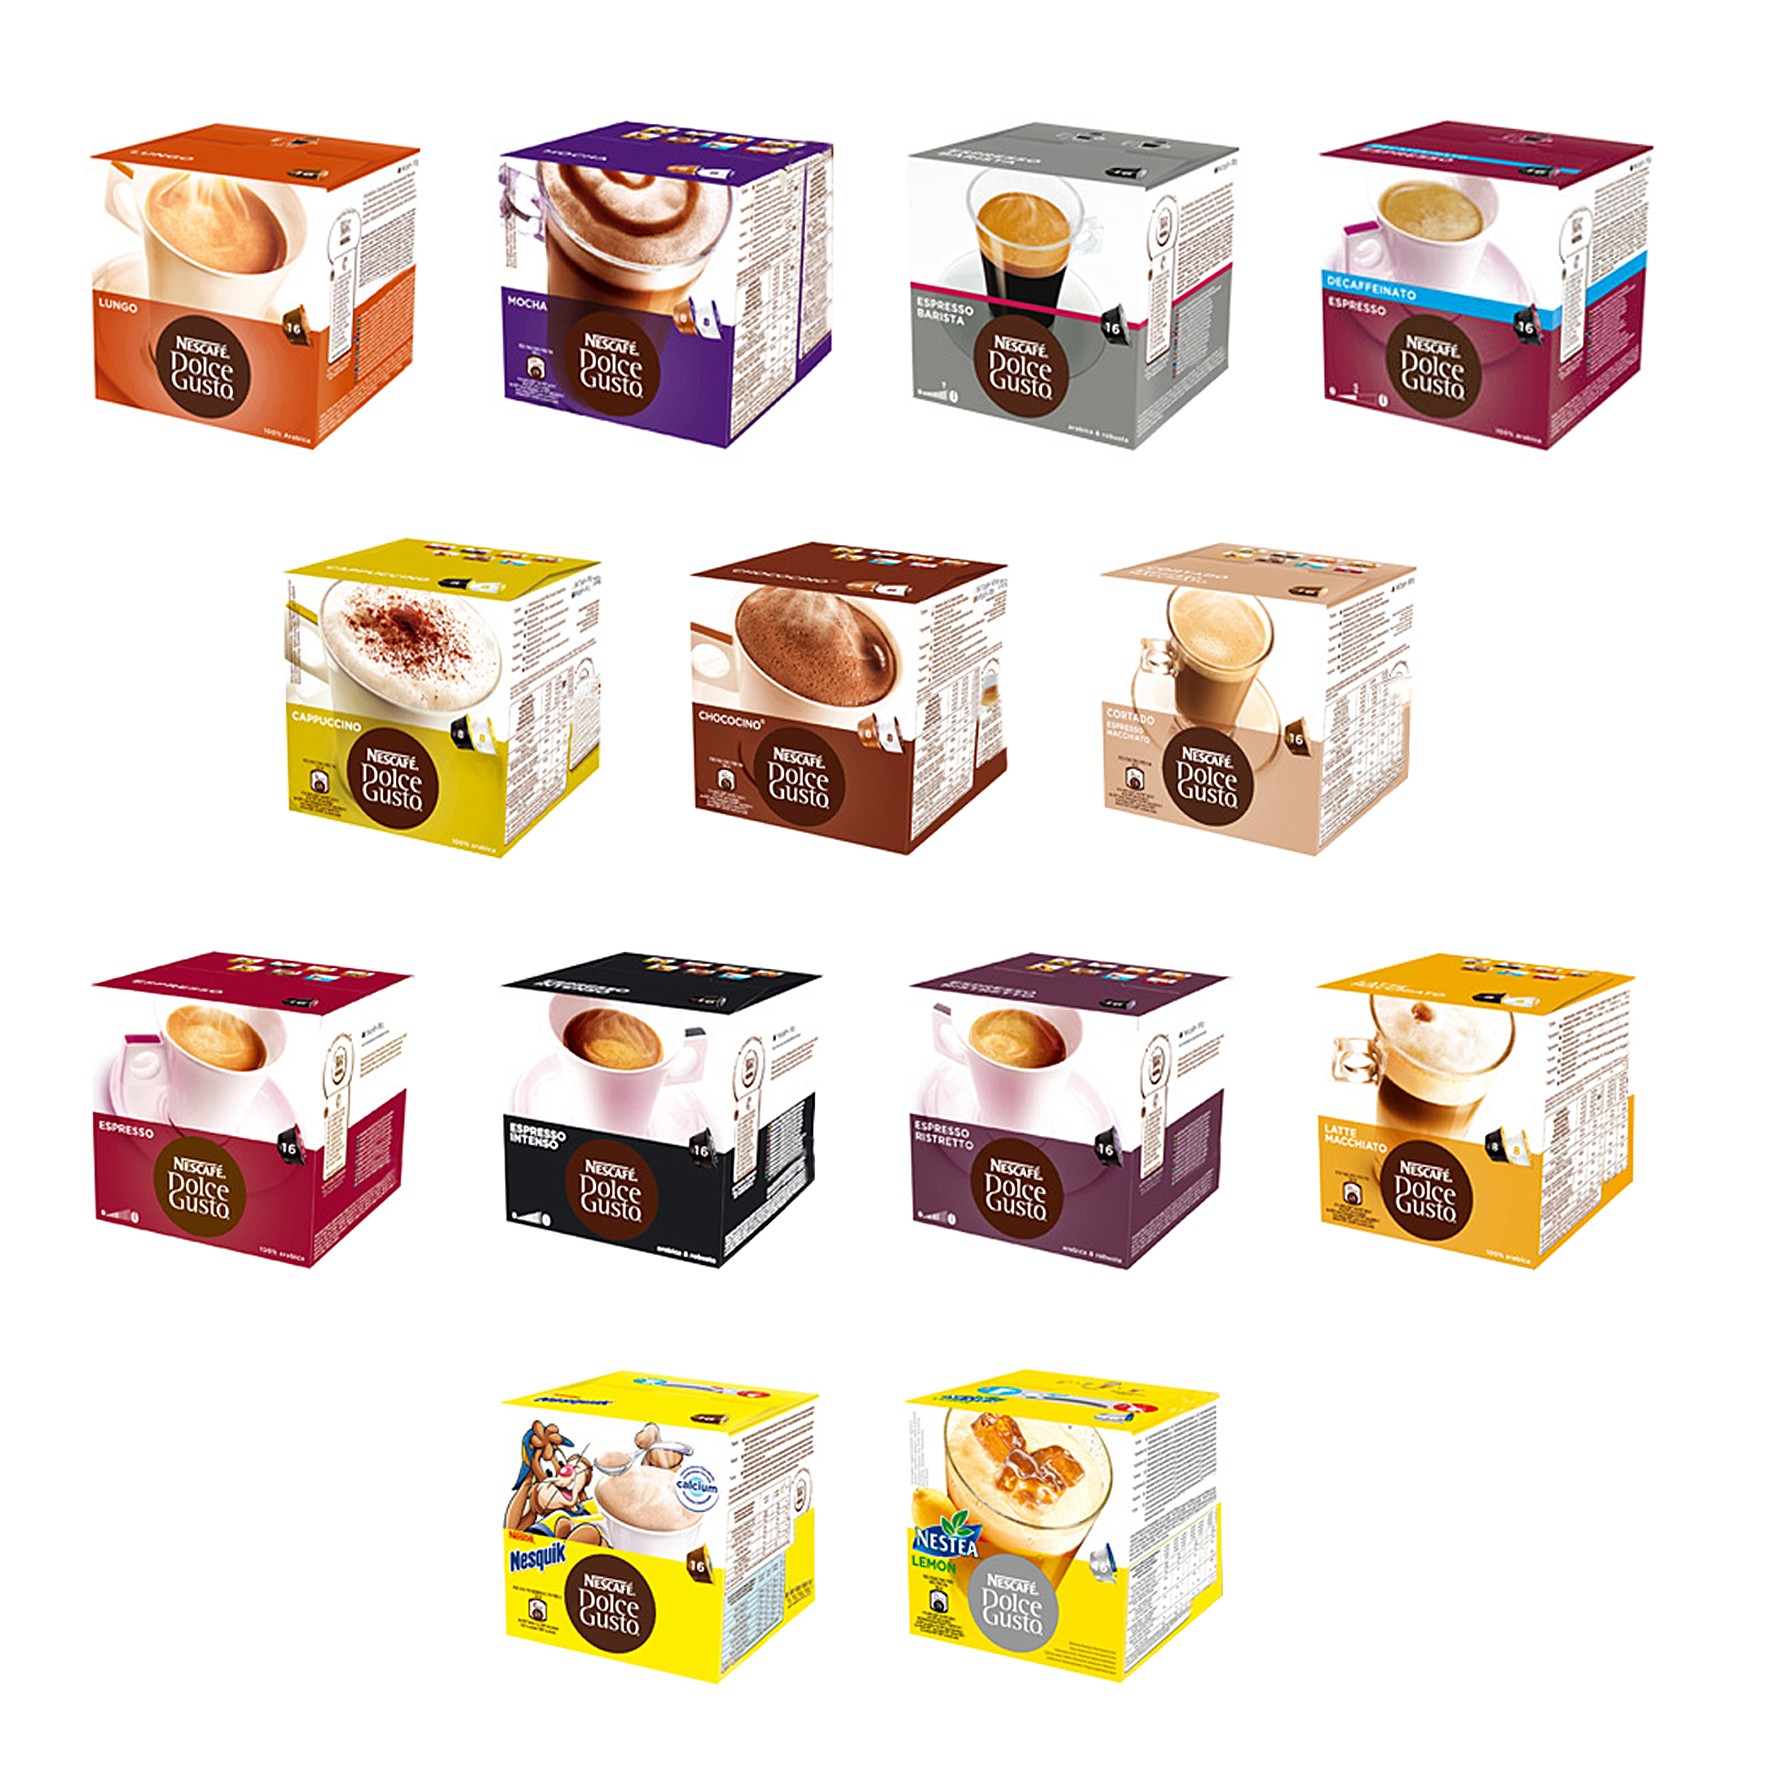 192 Coffee Capsules NESCAFE' DOLCE GUSTO Choose Your Flavors